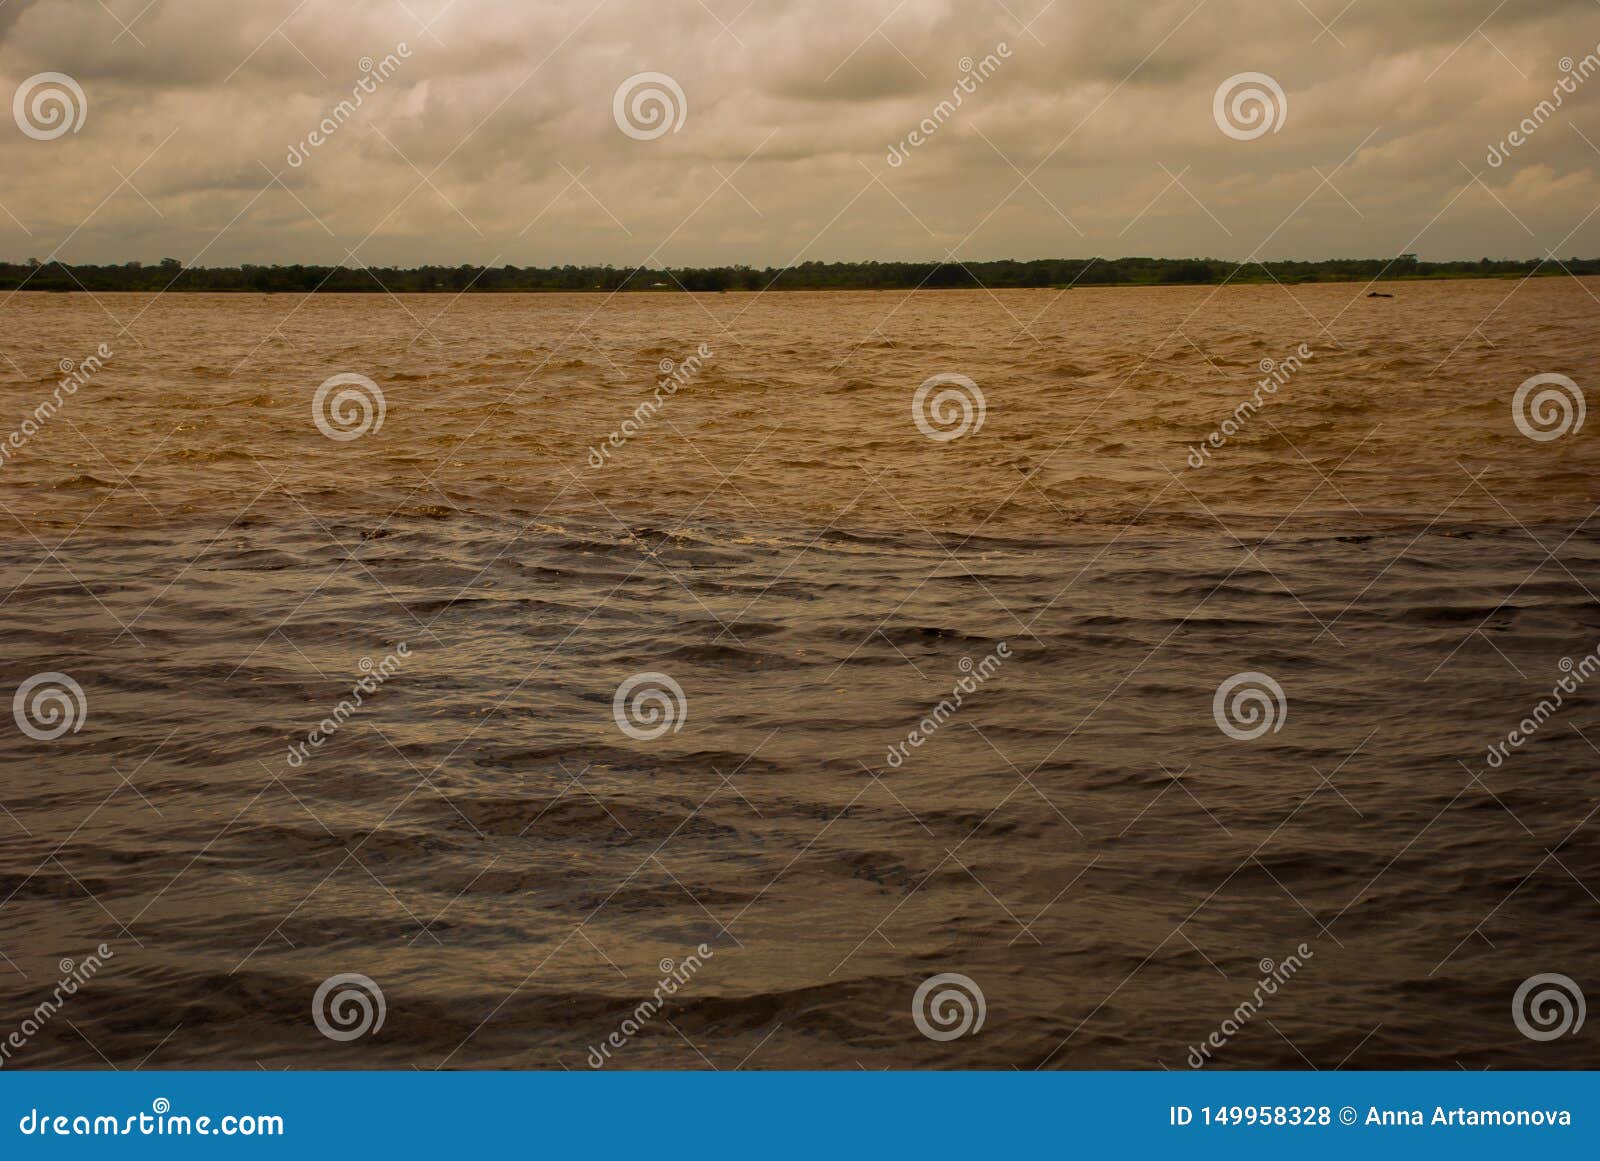 manaus, amazonas, brazil: the merger of the two colored river, rio negro, solimoes